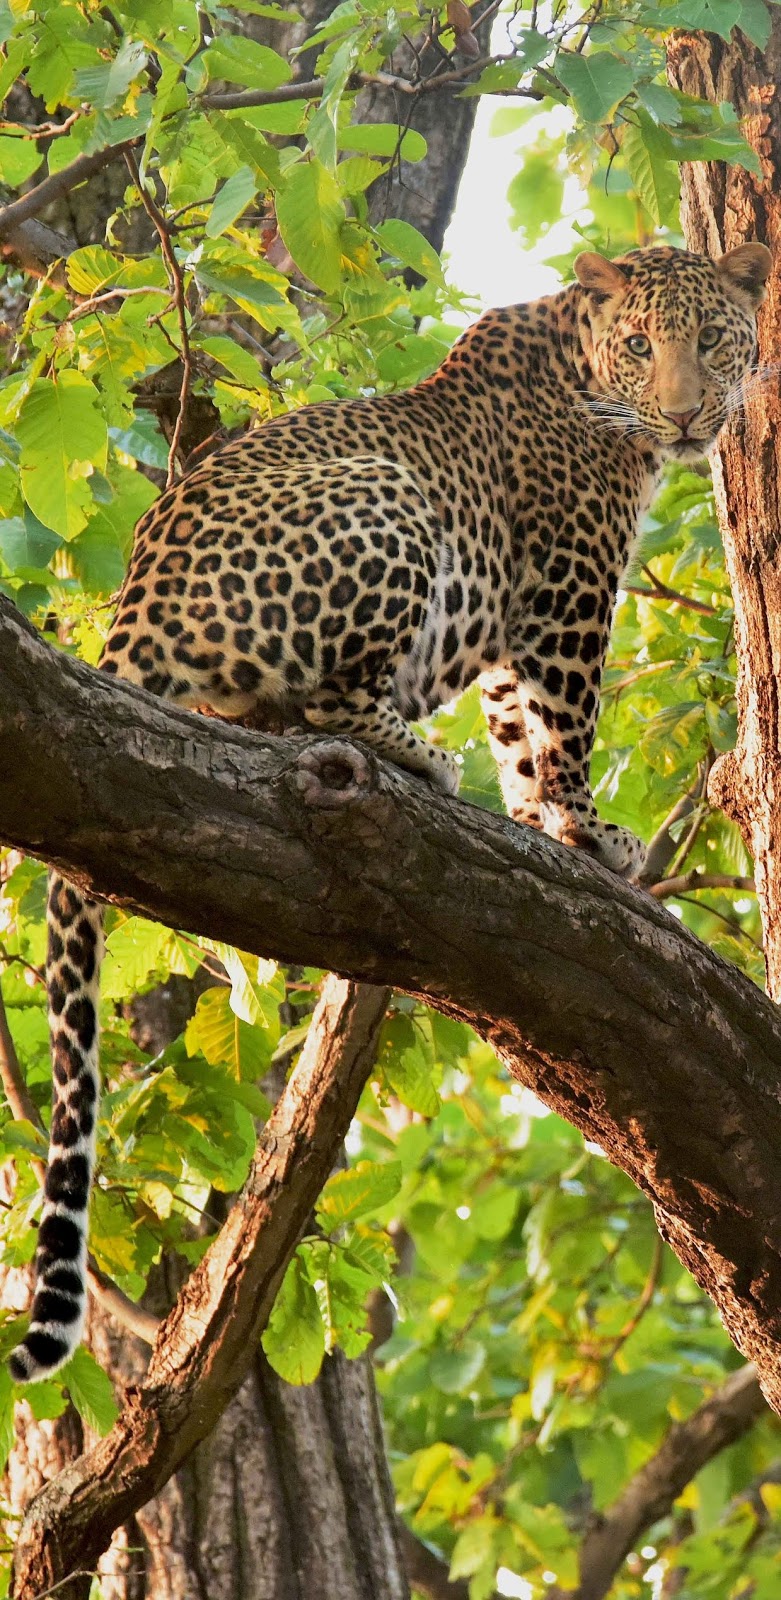 A leopard high up on a tree.